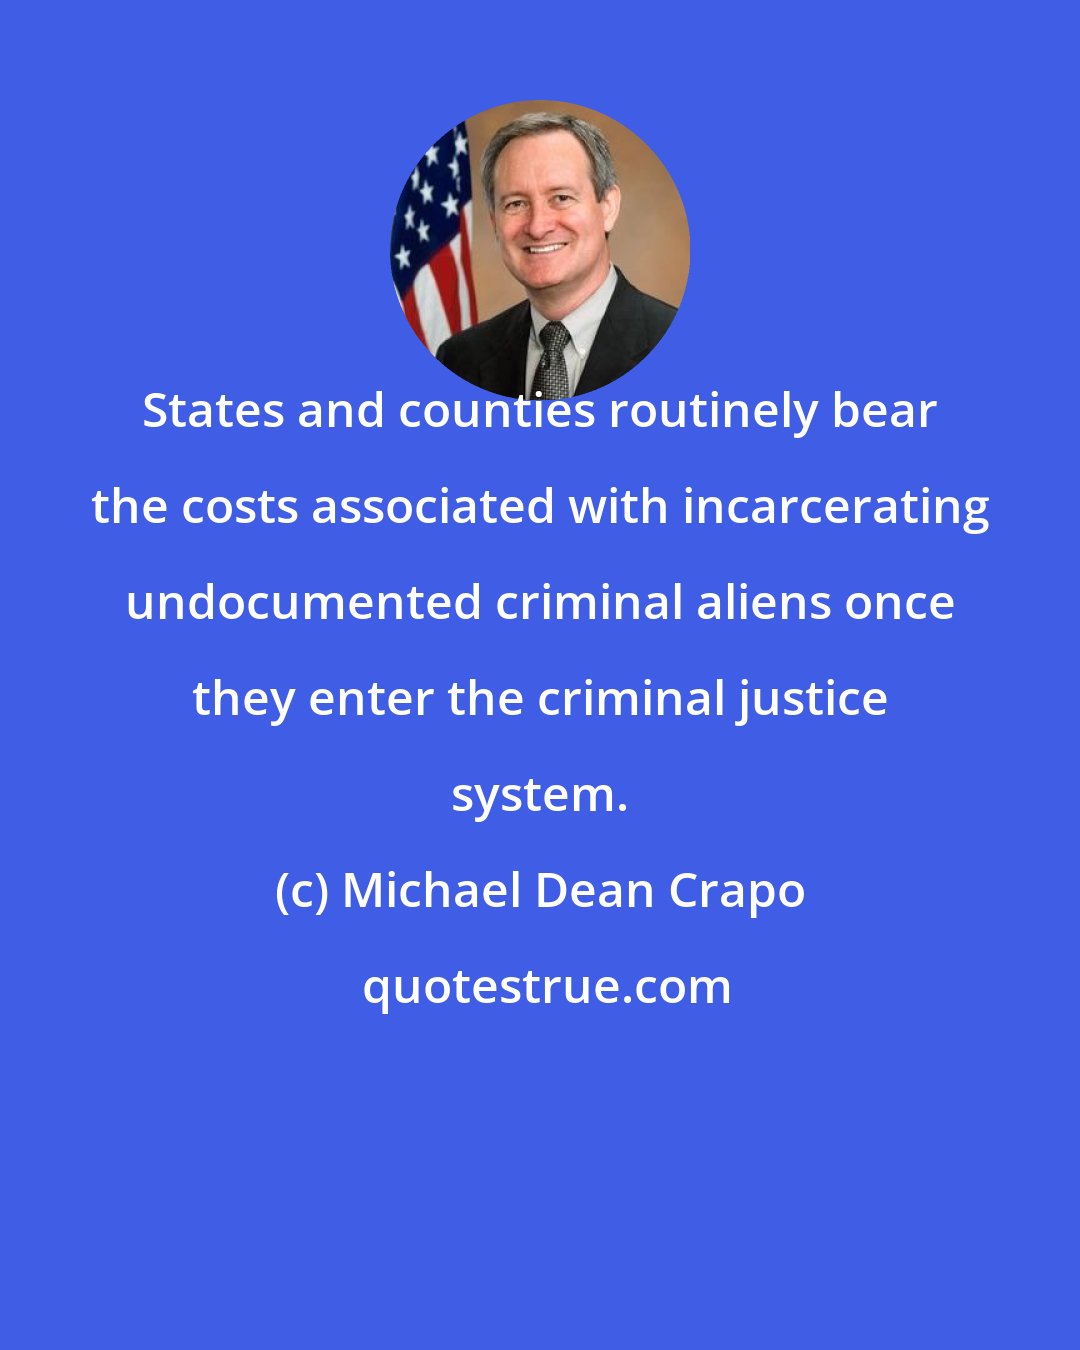 Michael Dean Crapo: States and counties routinely bear the costs associated with incarcerating undocumented criminal aliens once they enter the criminal justice system.